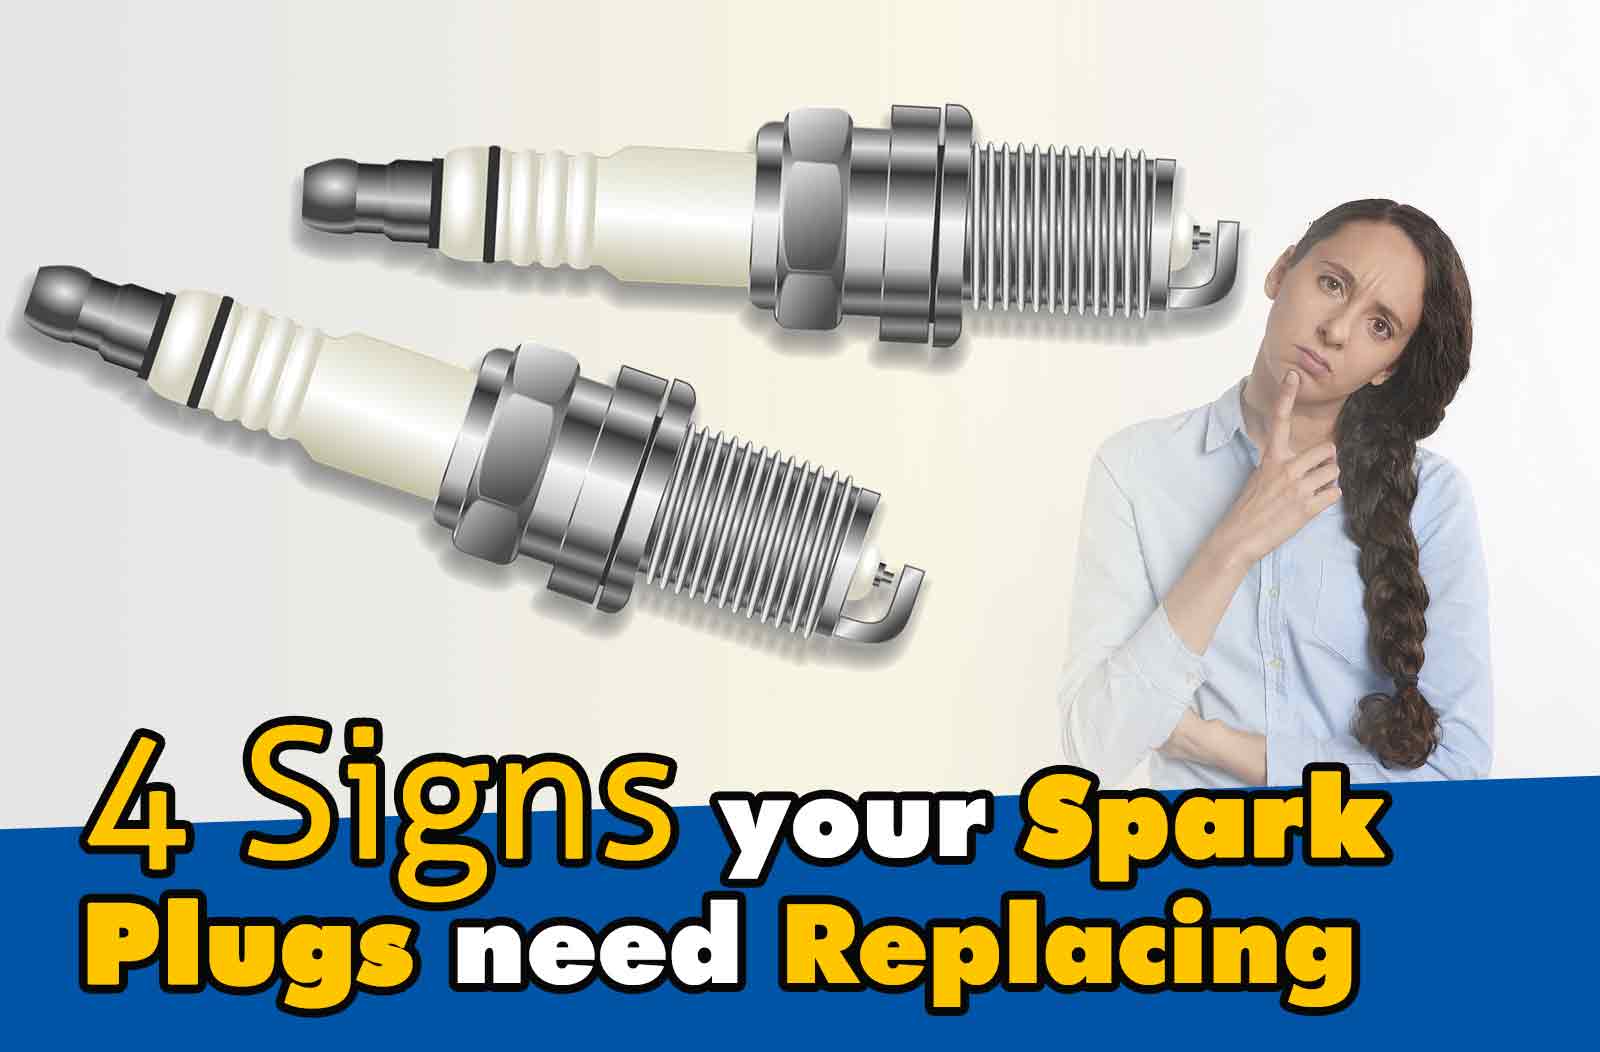 4 Signs your Spark Plugs need Replacing